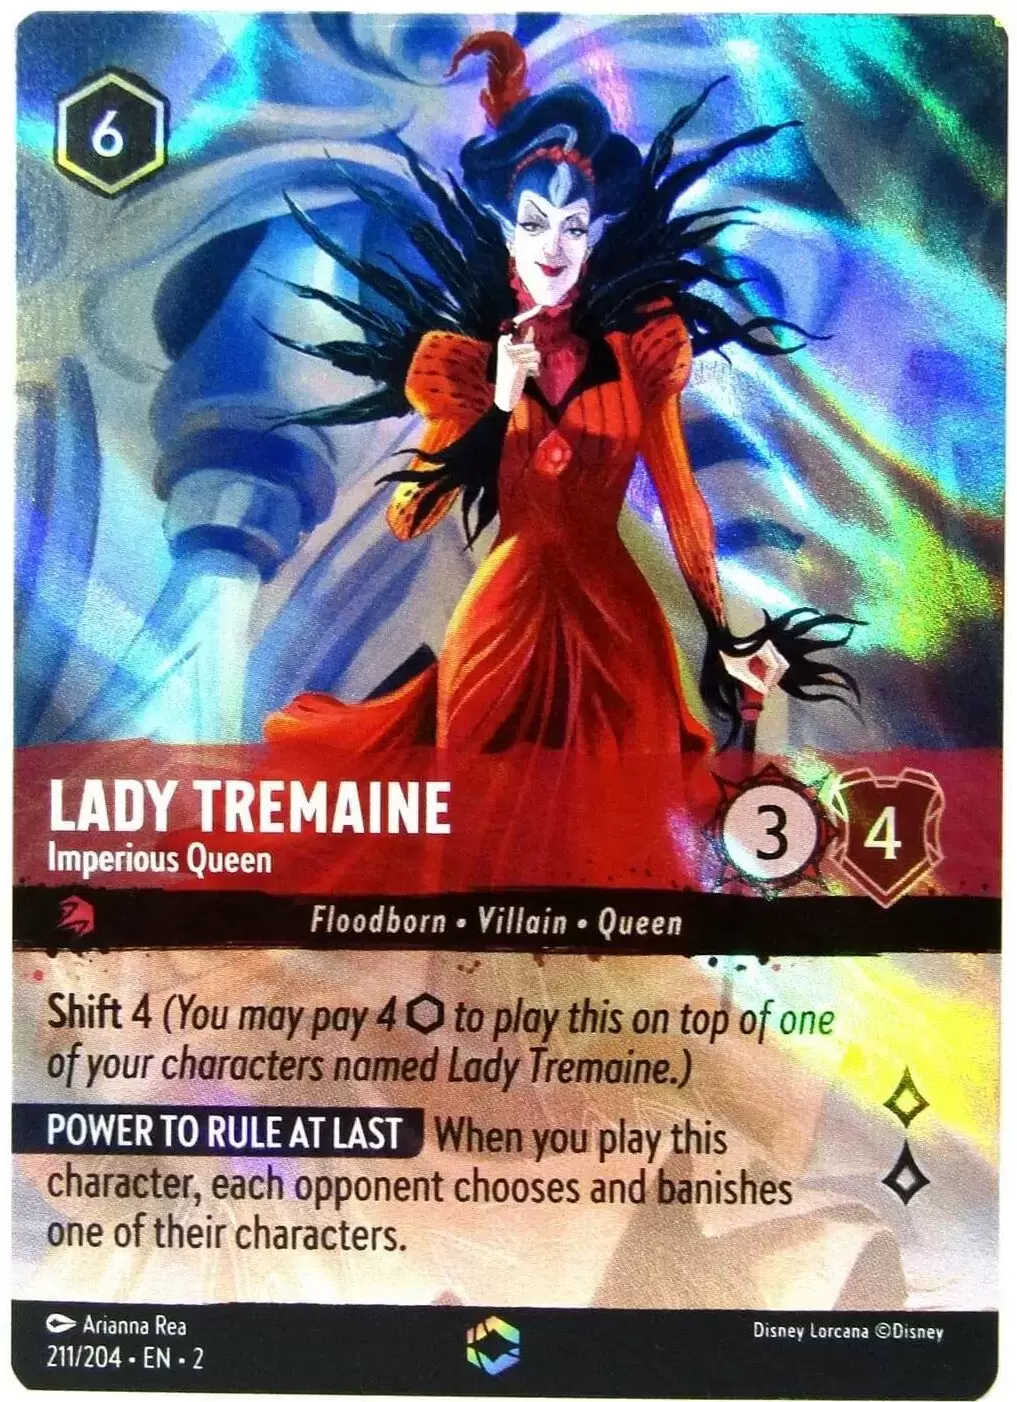 Rise of the Floodborn - Lady tremaine - Imperious Queen